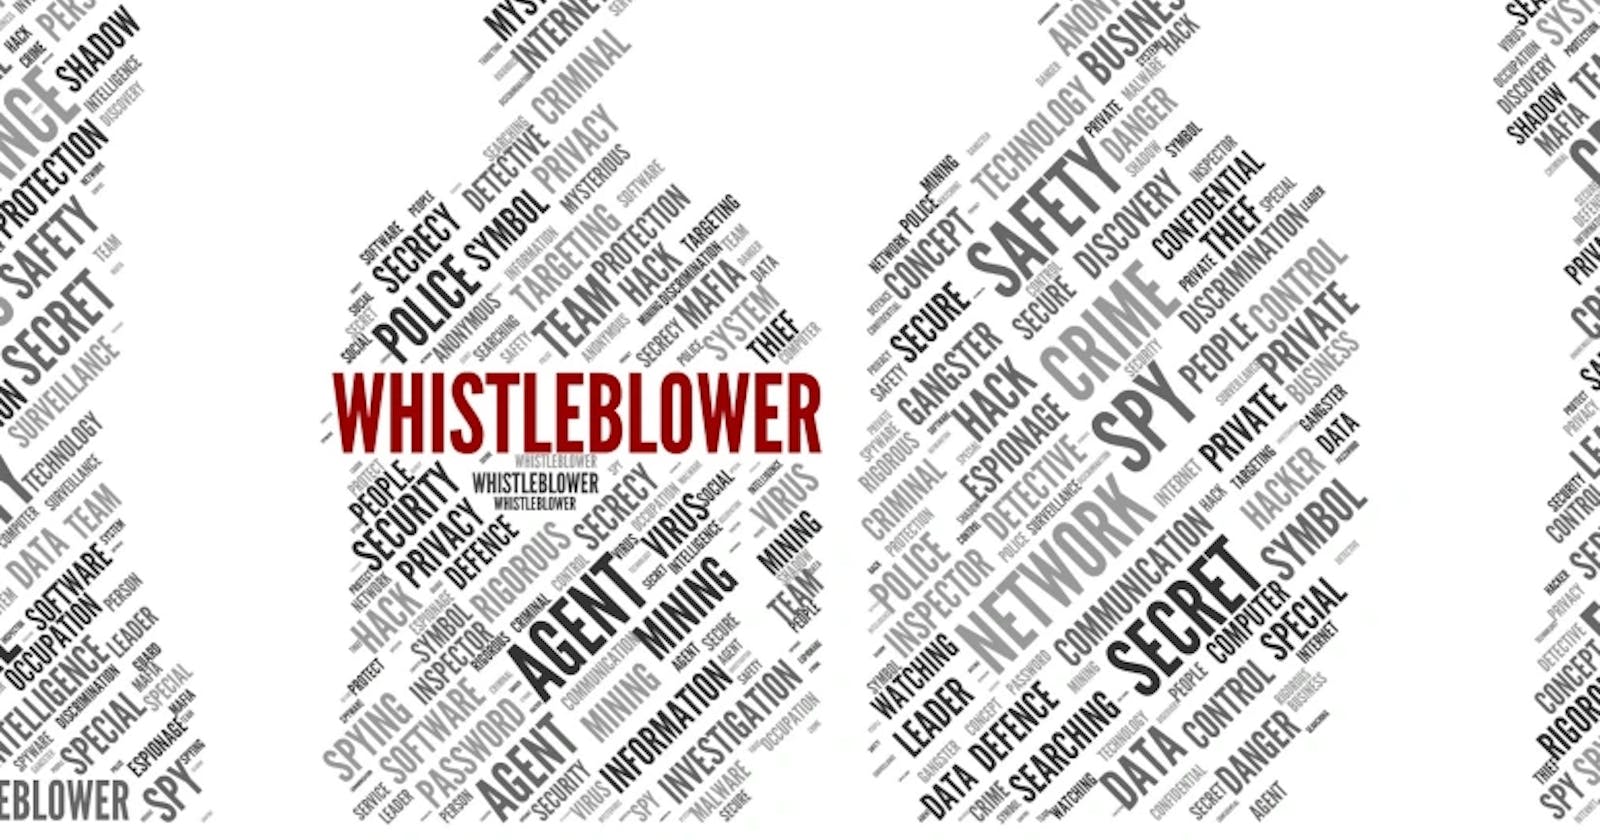 Whistleblowers: Heroes or Traitors? Examining the Impact of Edward Snowden and Other Brave Leakers